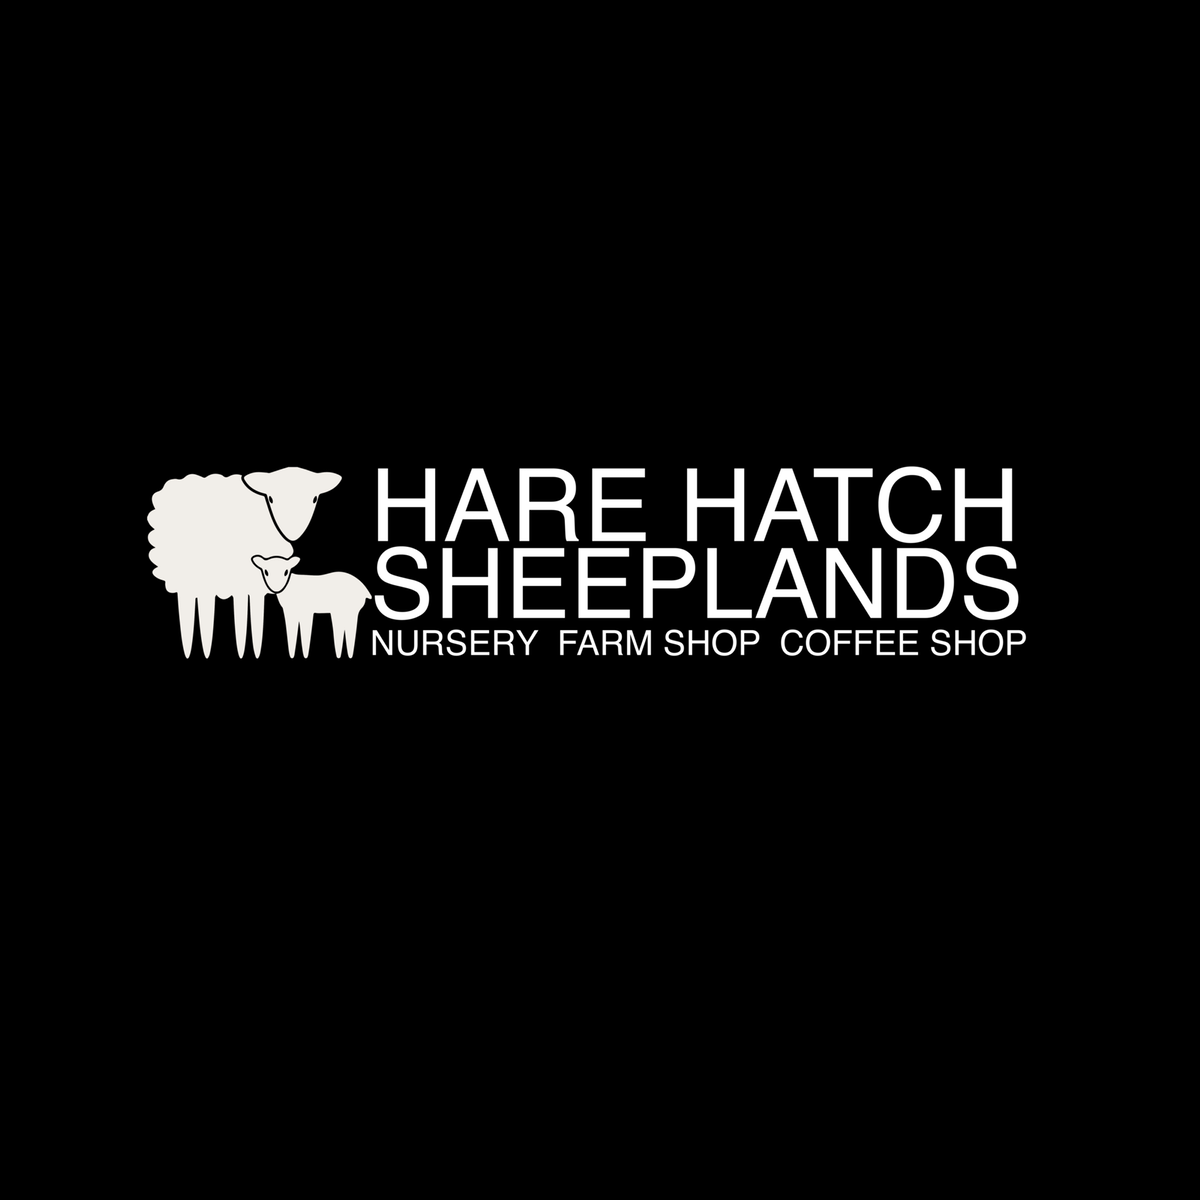 Hare Harch Sheeplands brand logo